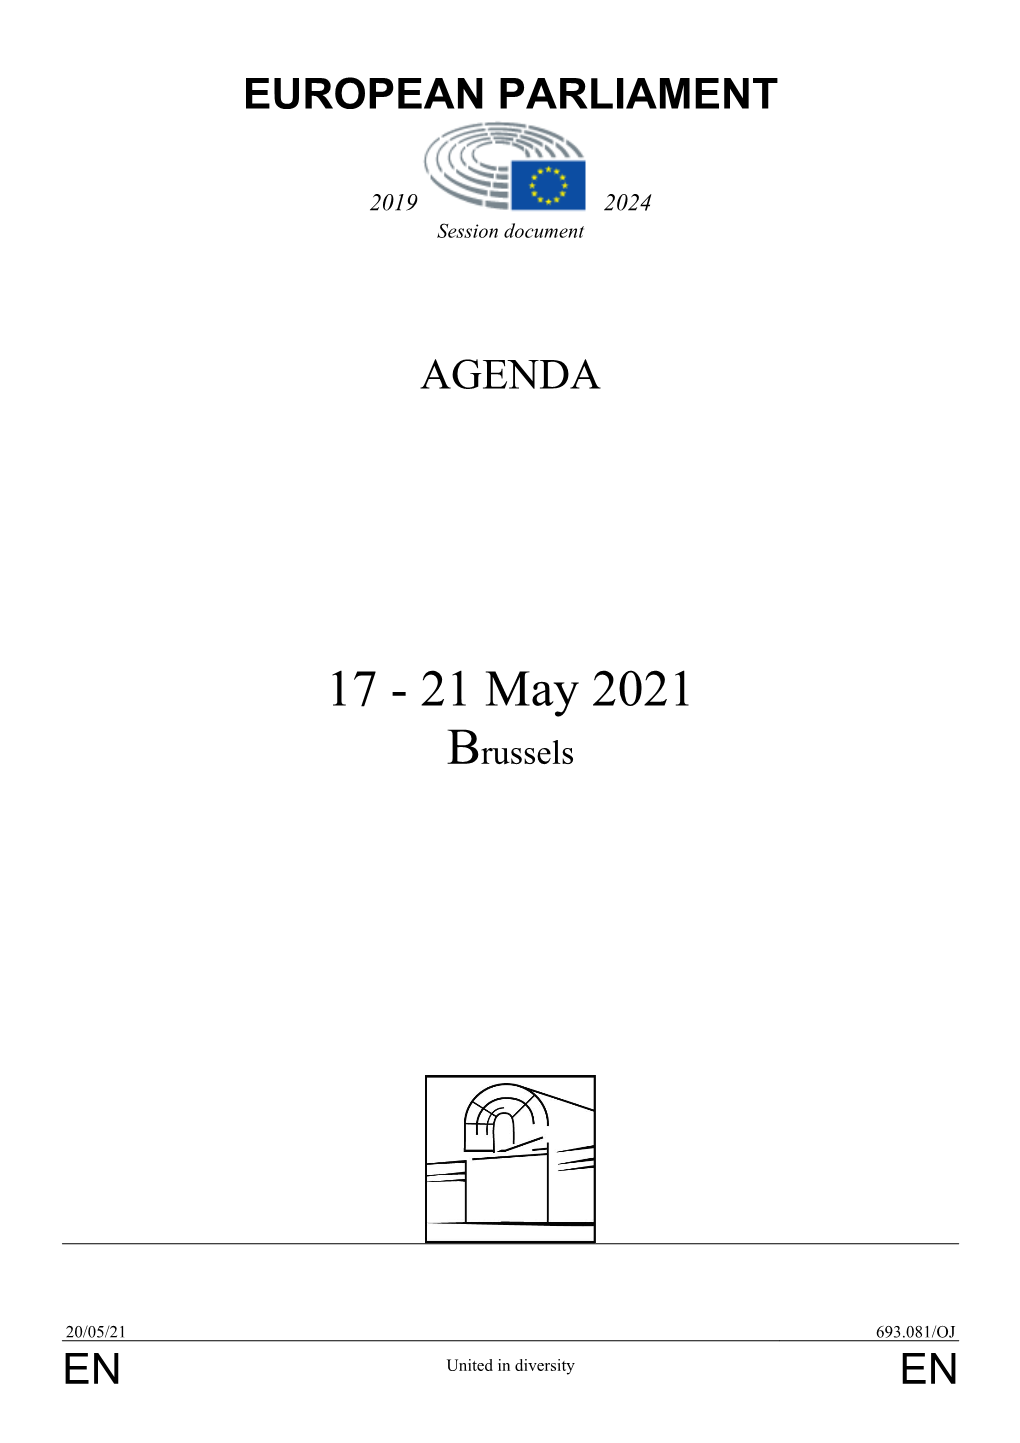 21 May 2021 Brussels